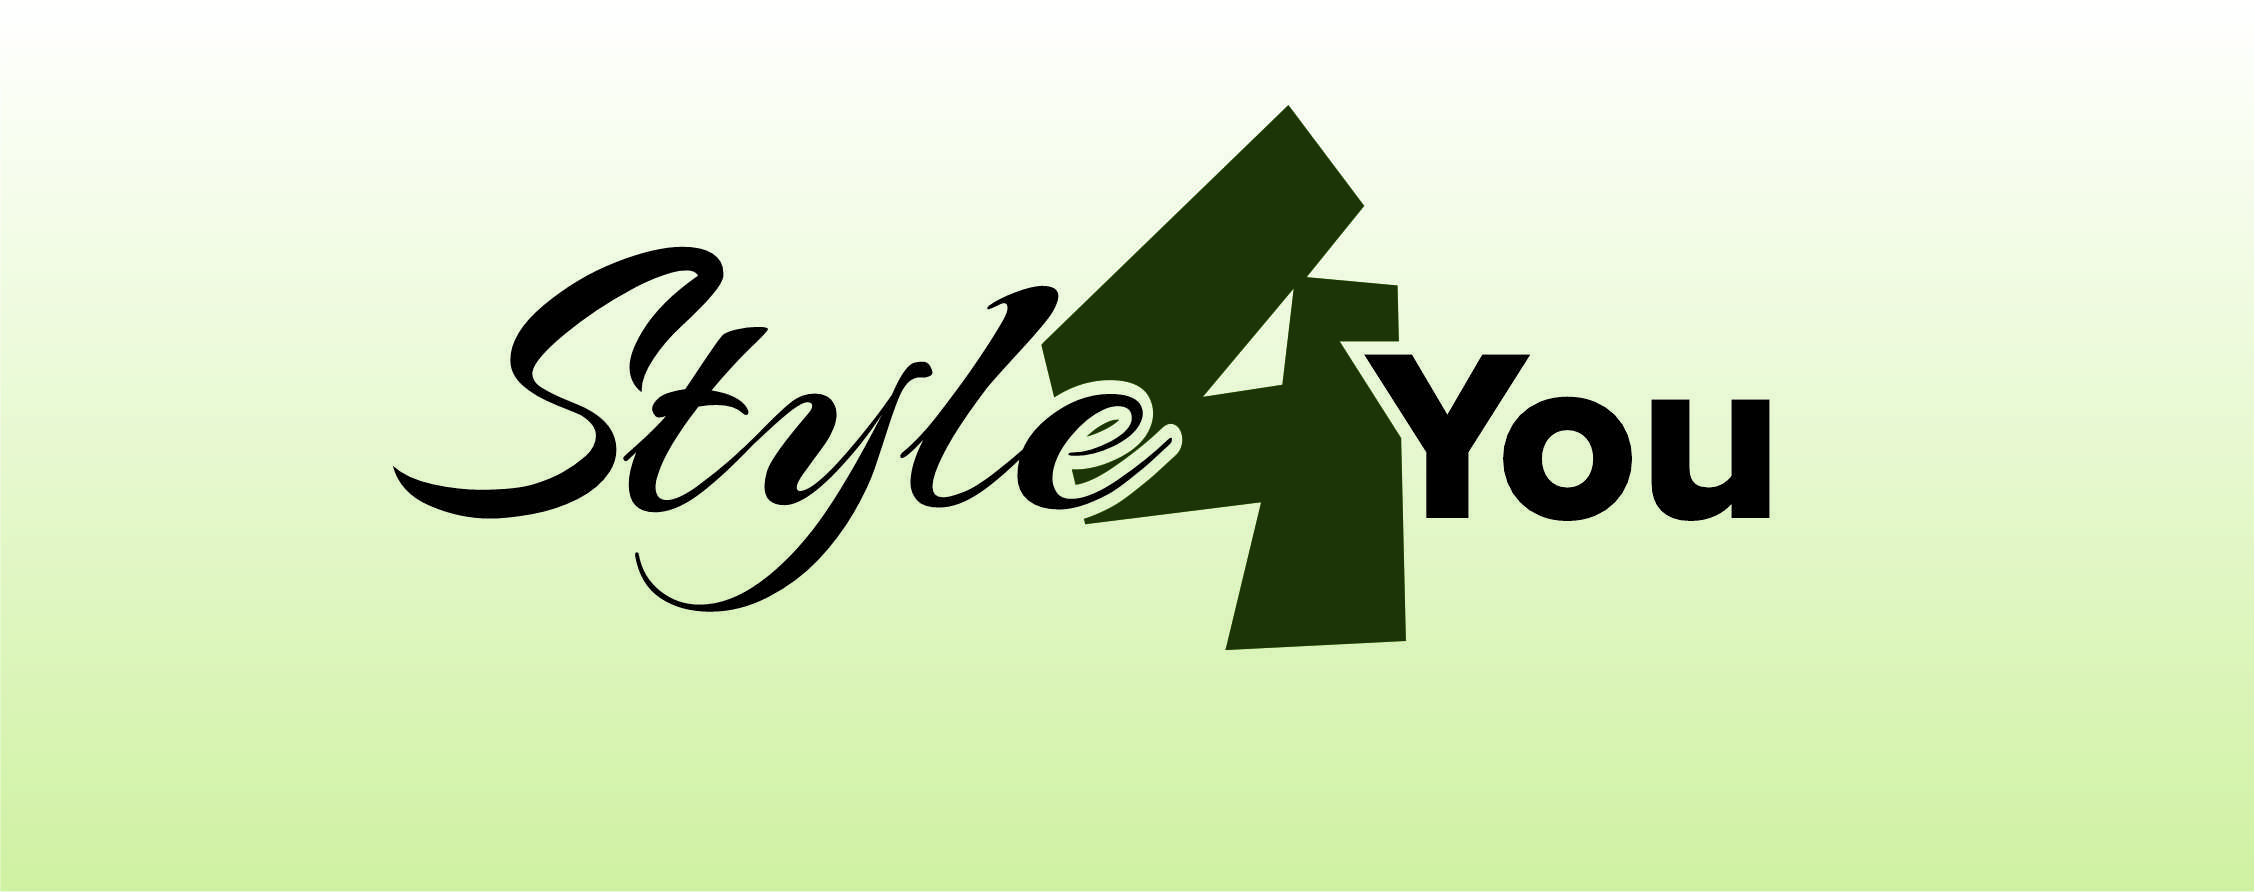 logo style4you / style for you